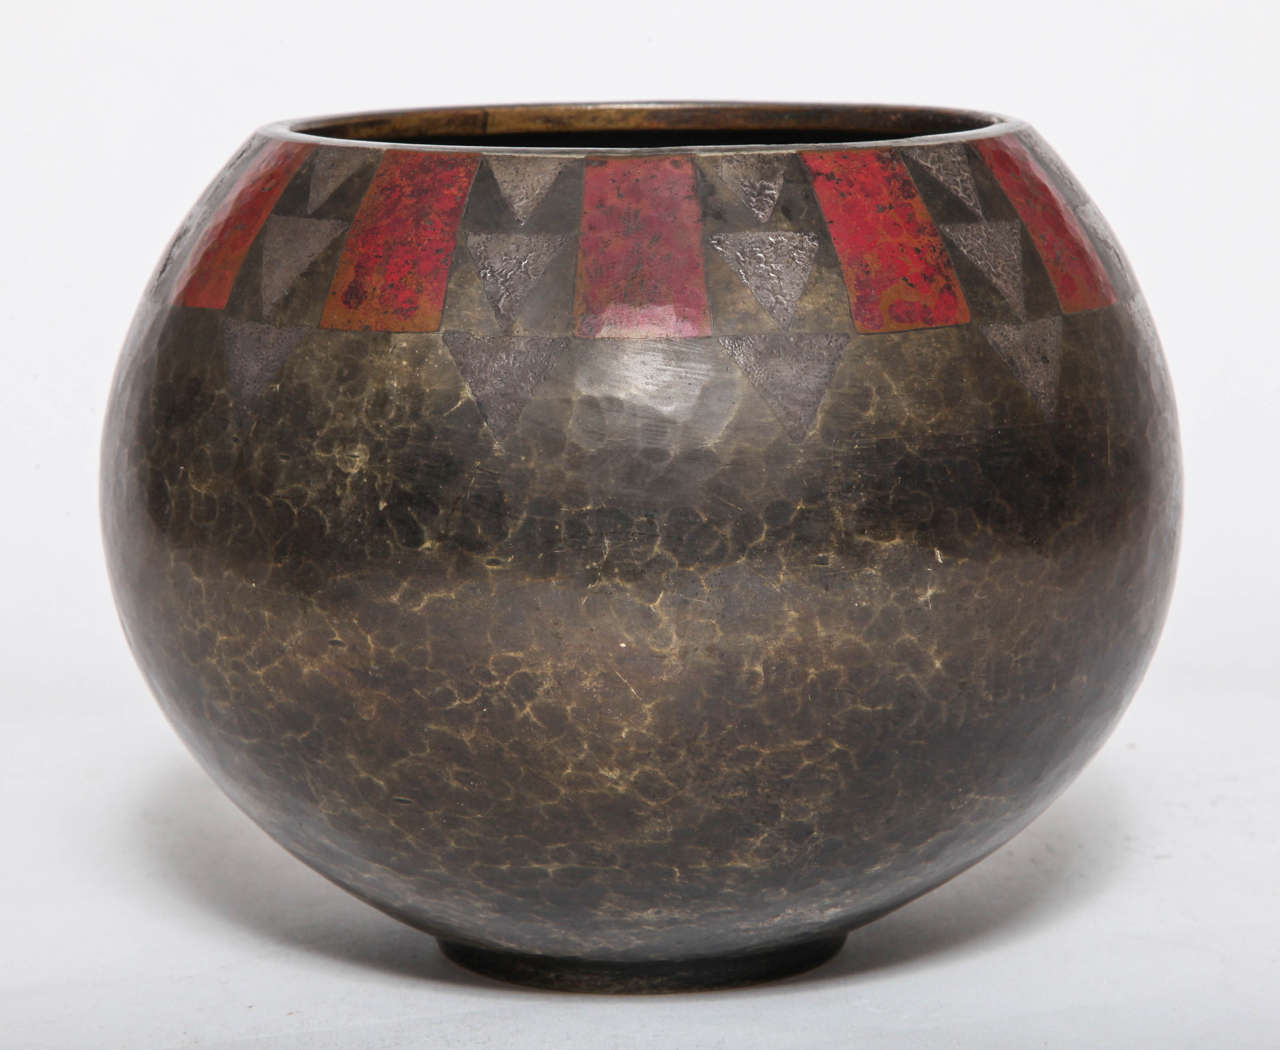 An Art Deco copper Dinanderie vase with geometric patterns of inlaid silver and rich red patinated geometric shapes. Hand-hammered. Claudius Linossier, France, signed on underside CL-LINOSIER.